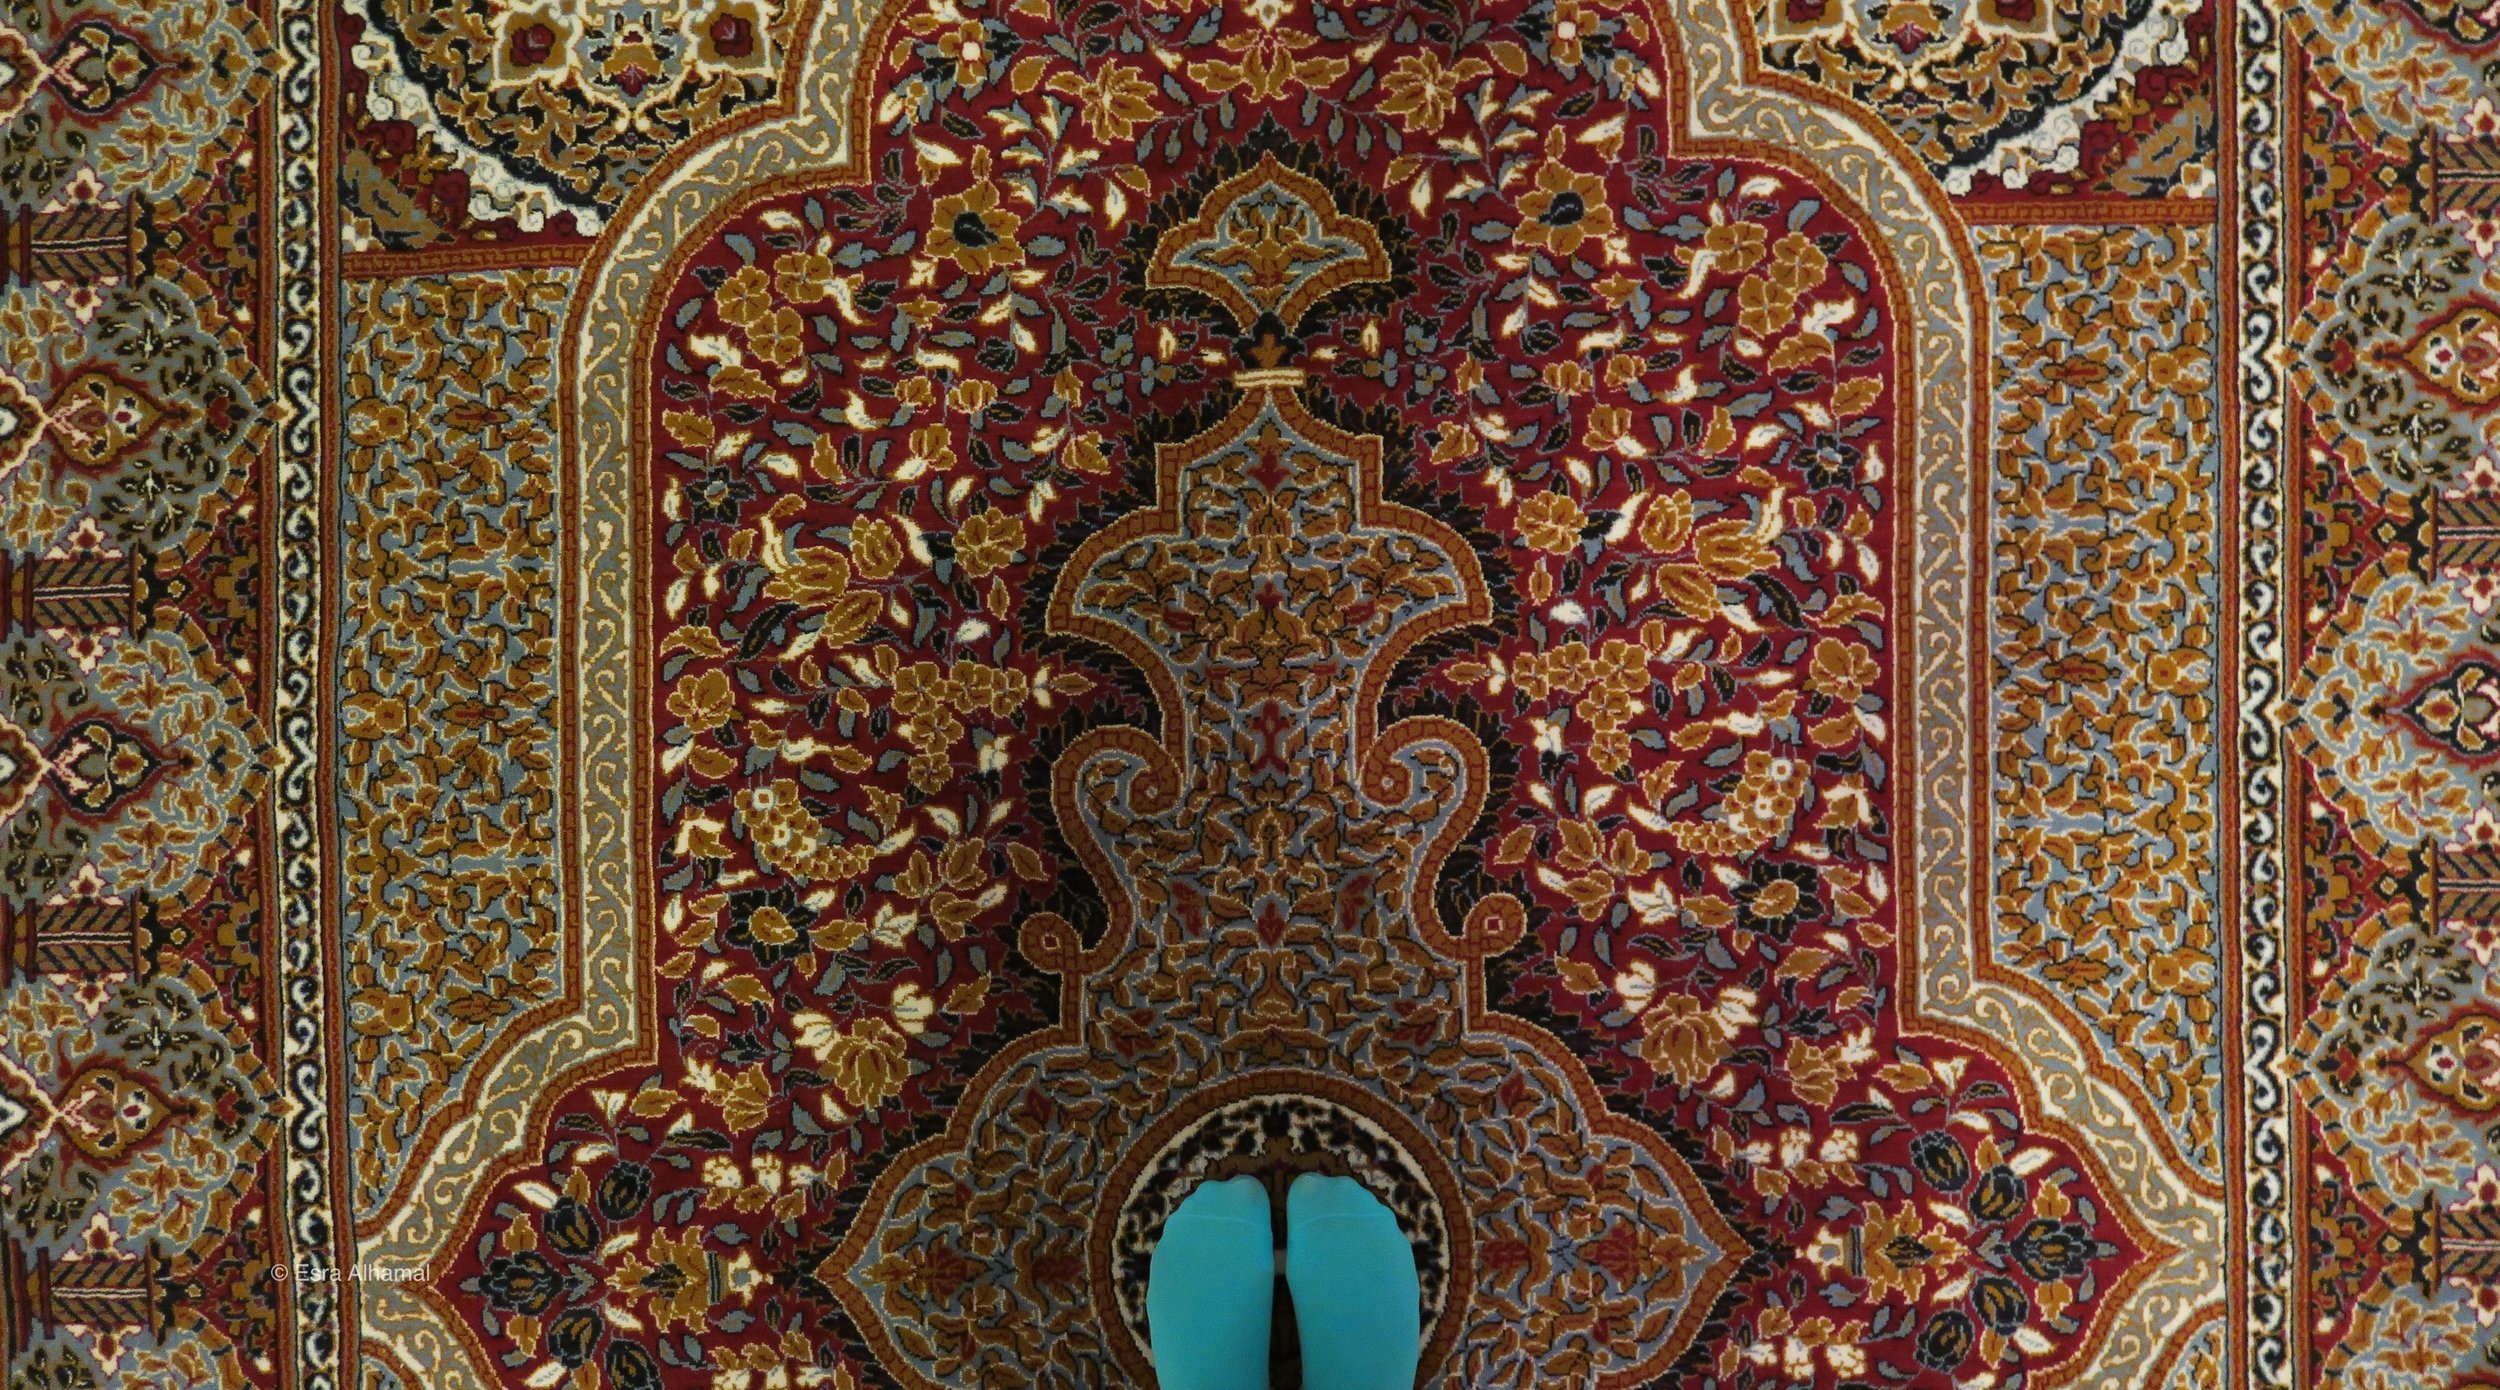 The carpet of the mosque in Dubrovnik 